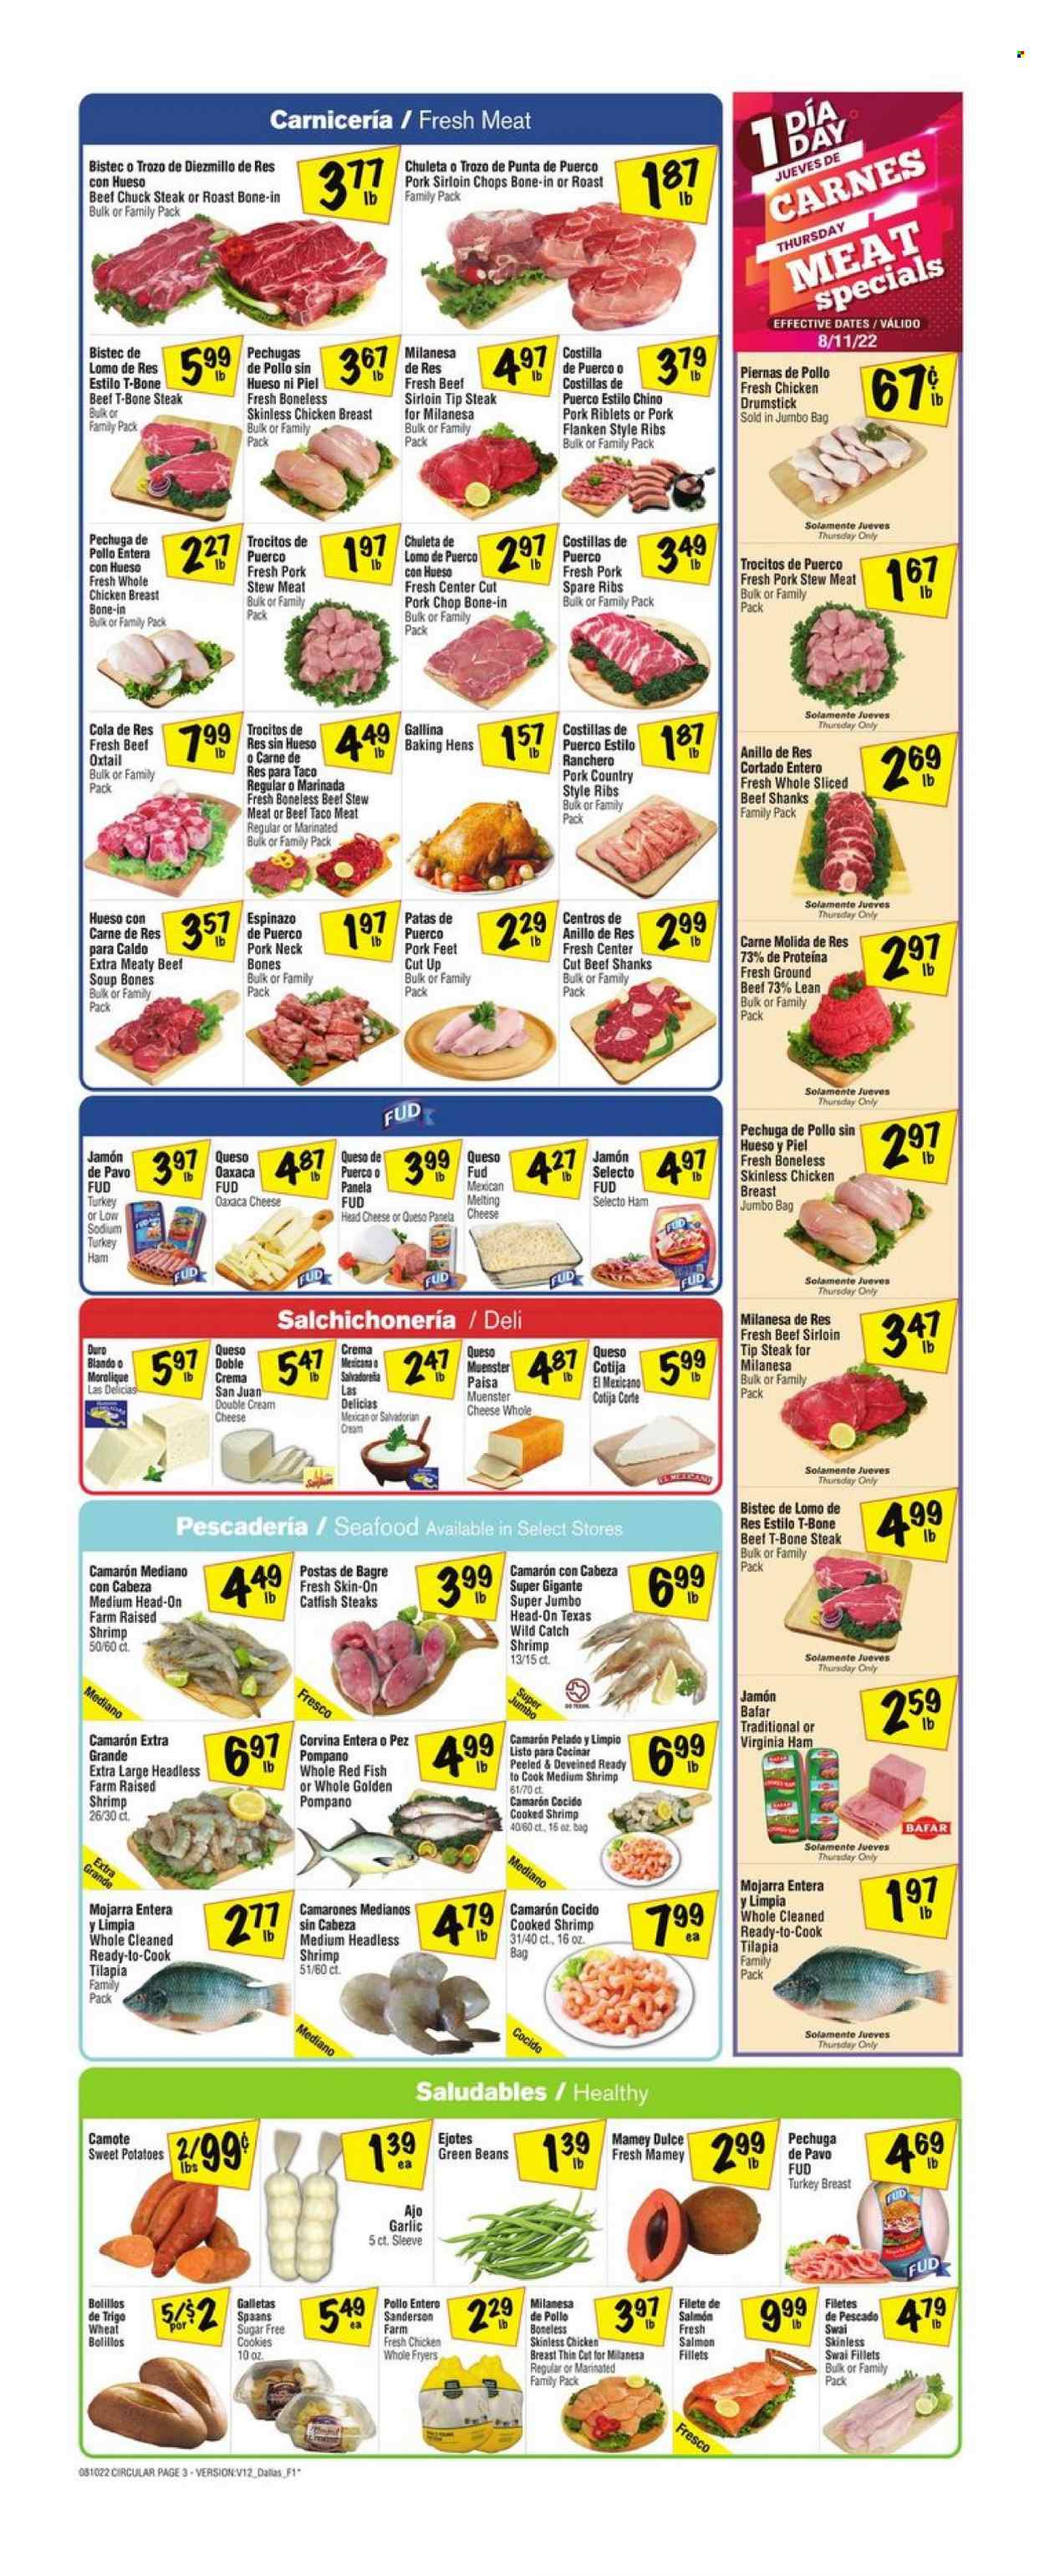 thumbnail - Fiesta Mart Flyer - 08/10/2022 - 08/16/2022 - Sales products - stew meat, beans, garlic, green beans, sweet potato, potatoes, catfish, salmon, salmon fillet, tilapia, pompano, seafood, fish, shrimps, swai fillet, soup, ham, virginia ham, cream cheese, Münster cheese, Panela cheese, cookies, turkey breast, whole chicken, chicken breasts, beef meat, beef sirloin, ground beef, t-bone steak, oxtail, steak, chuck steak, pork chops, pork loin, pork meat, pork ribs, pork spare ribs, country style ribs. Page 3.